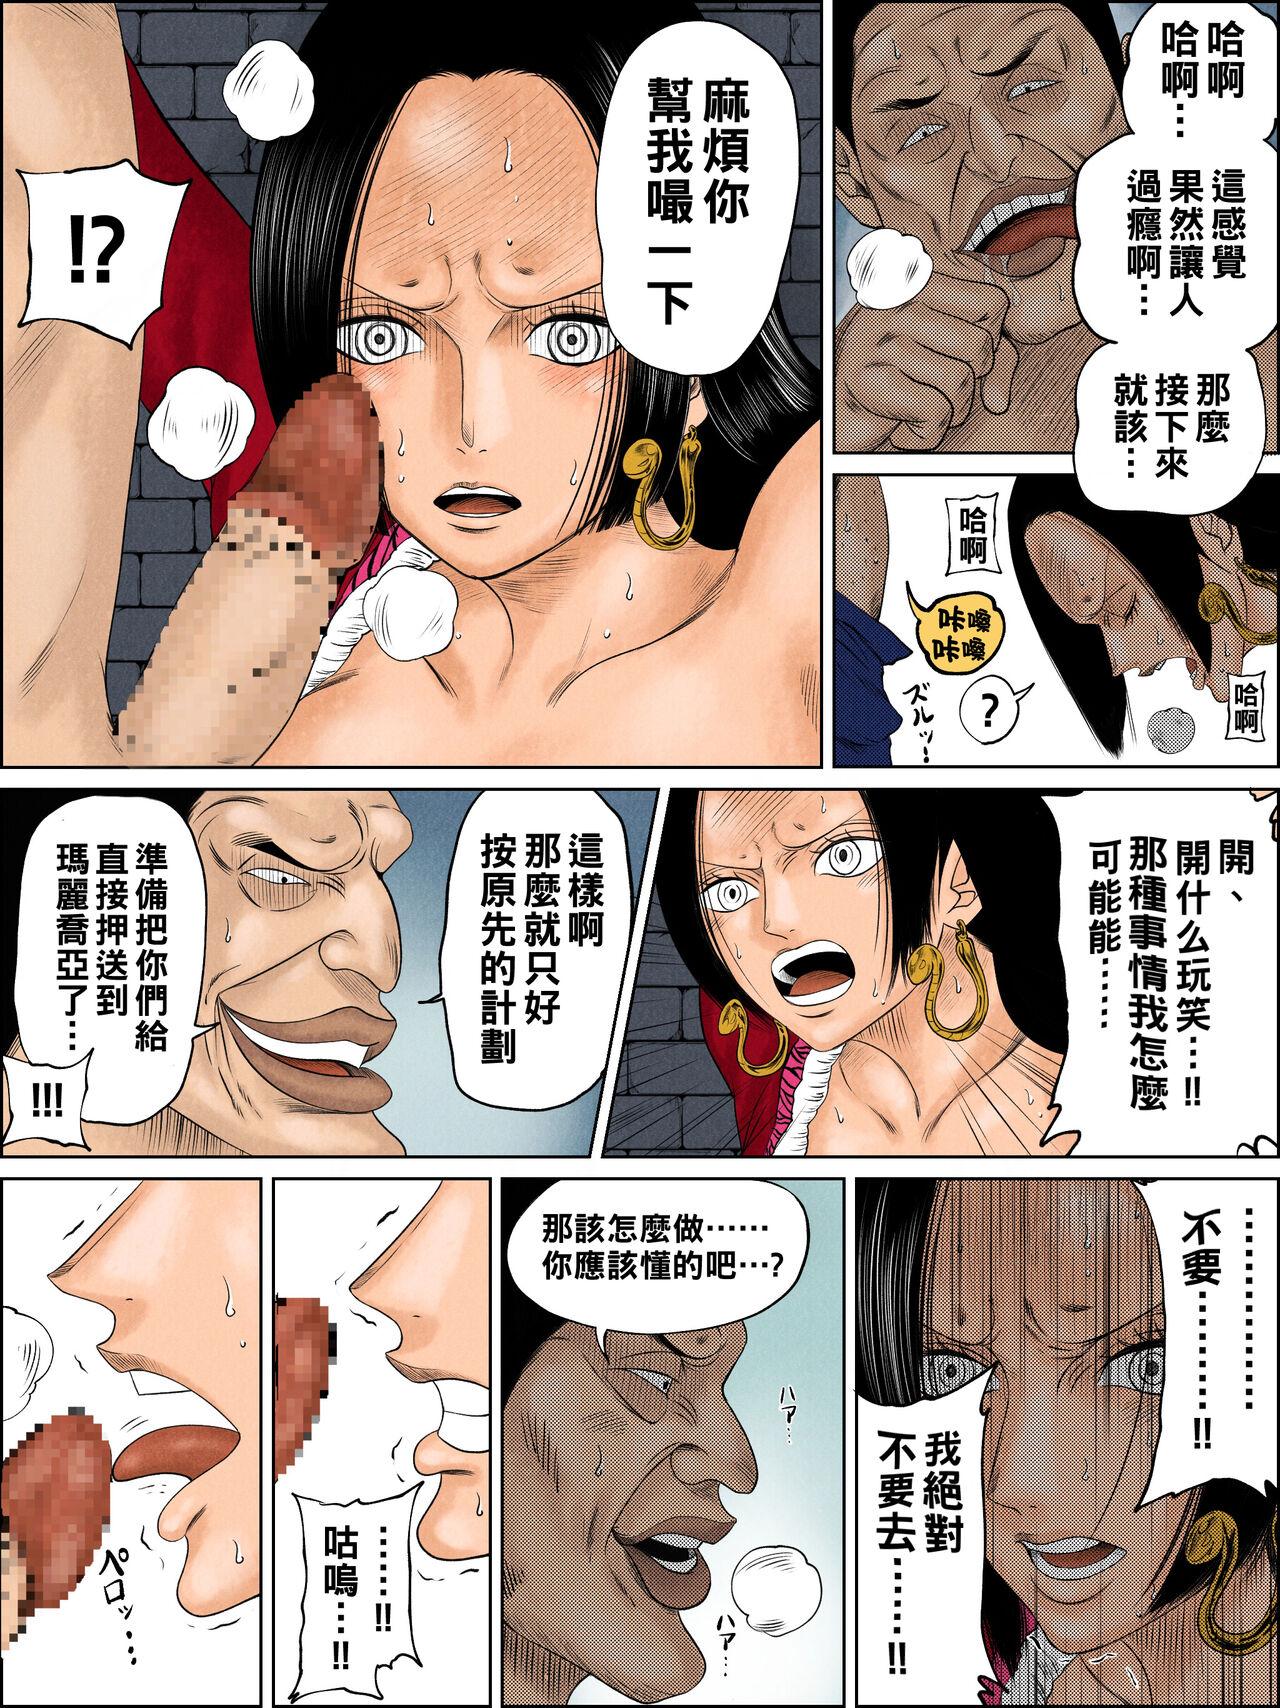 Dicks [アズライトン] ハンコック漫画 (ワンピース)（Chinese） - One piece Toilet - Picture 3